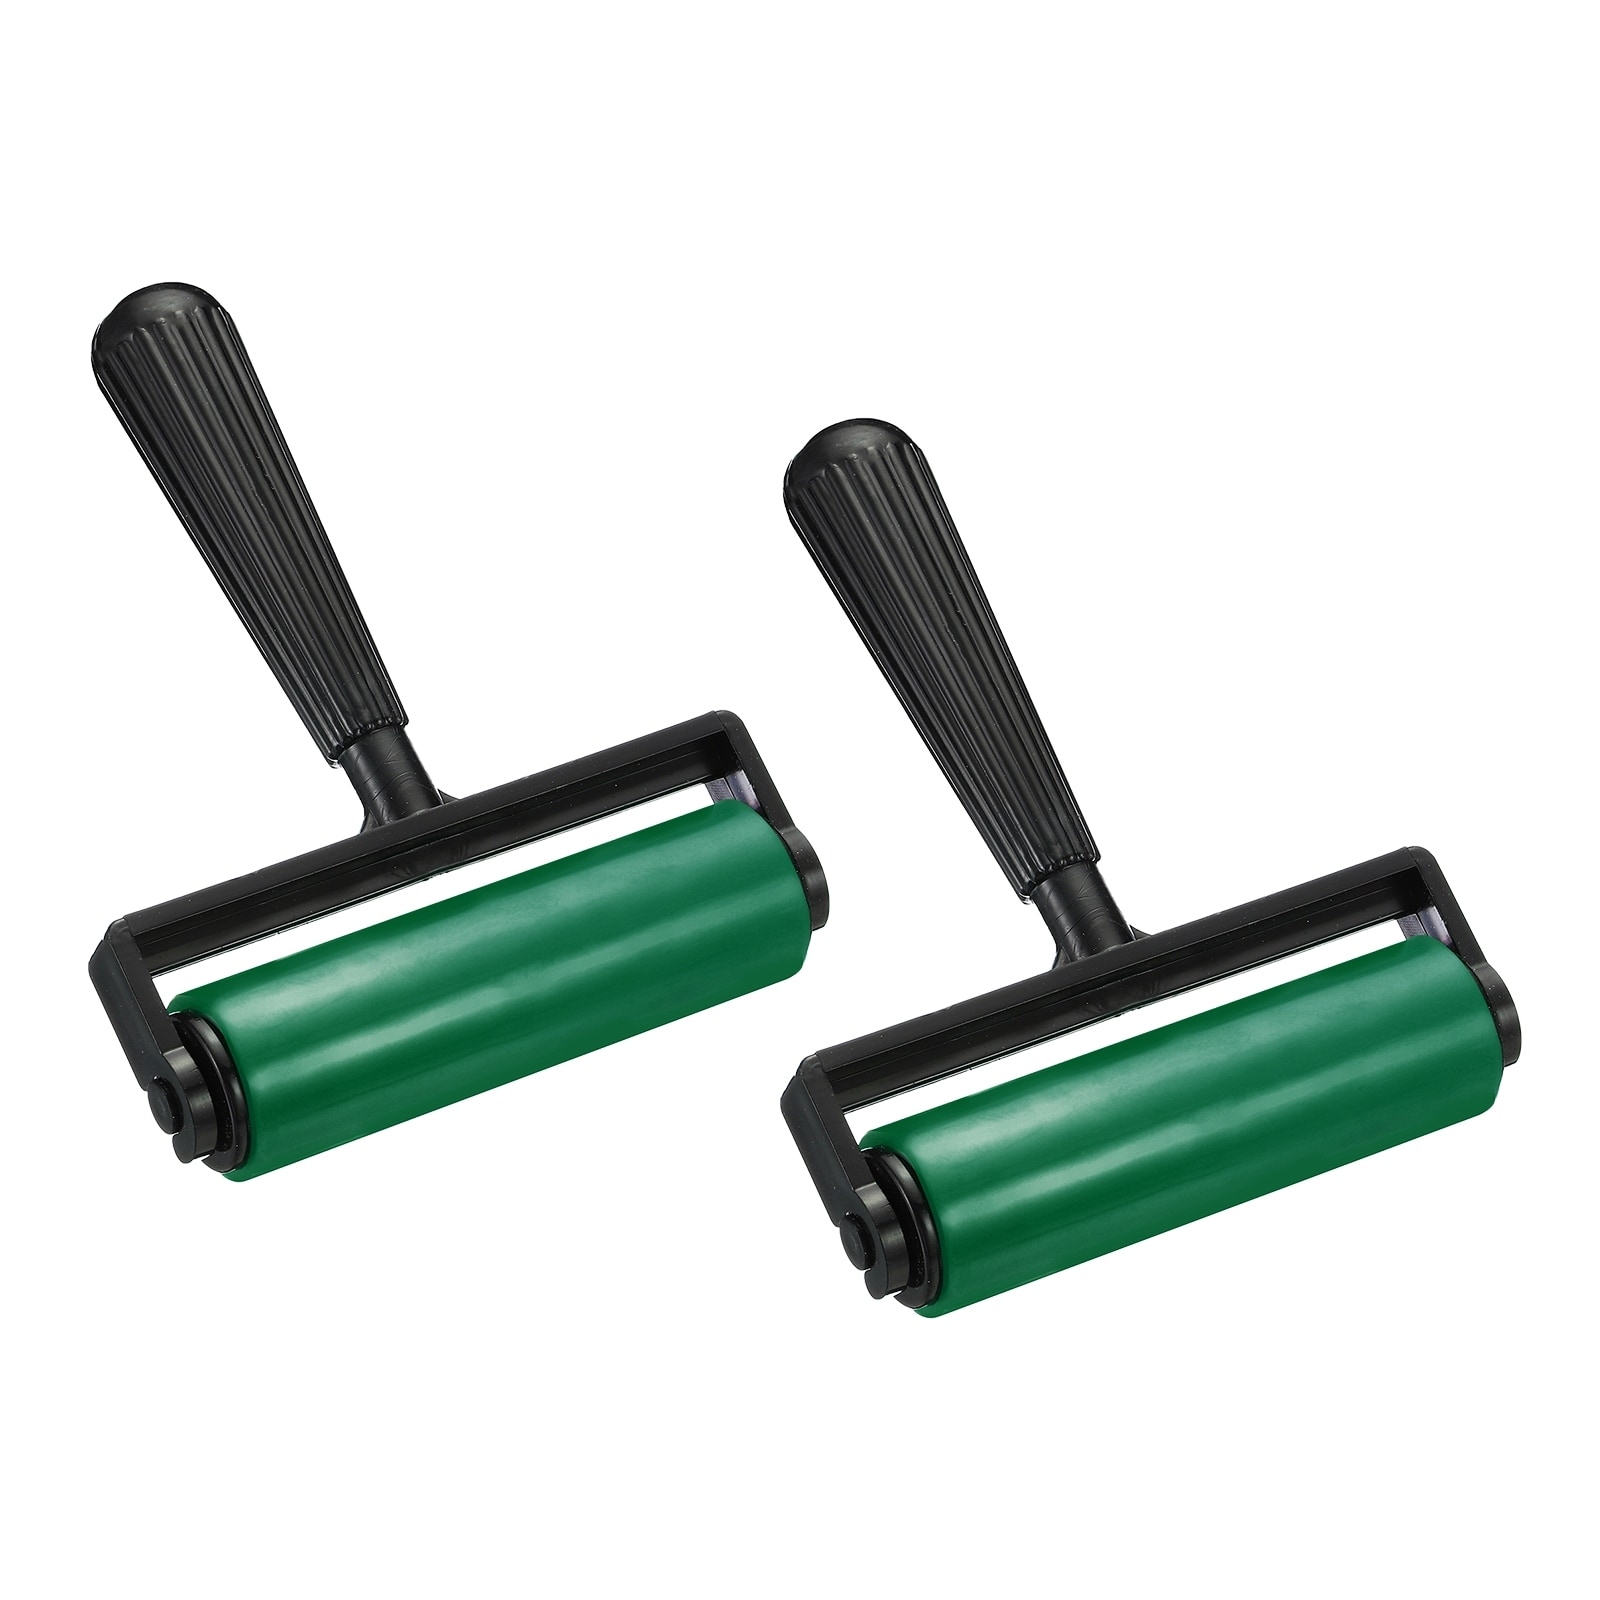 2 Pcs Brayer Rollers for Printmaking Ink Other Art Supplies